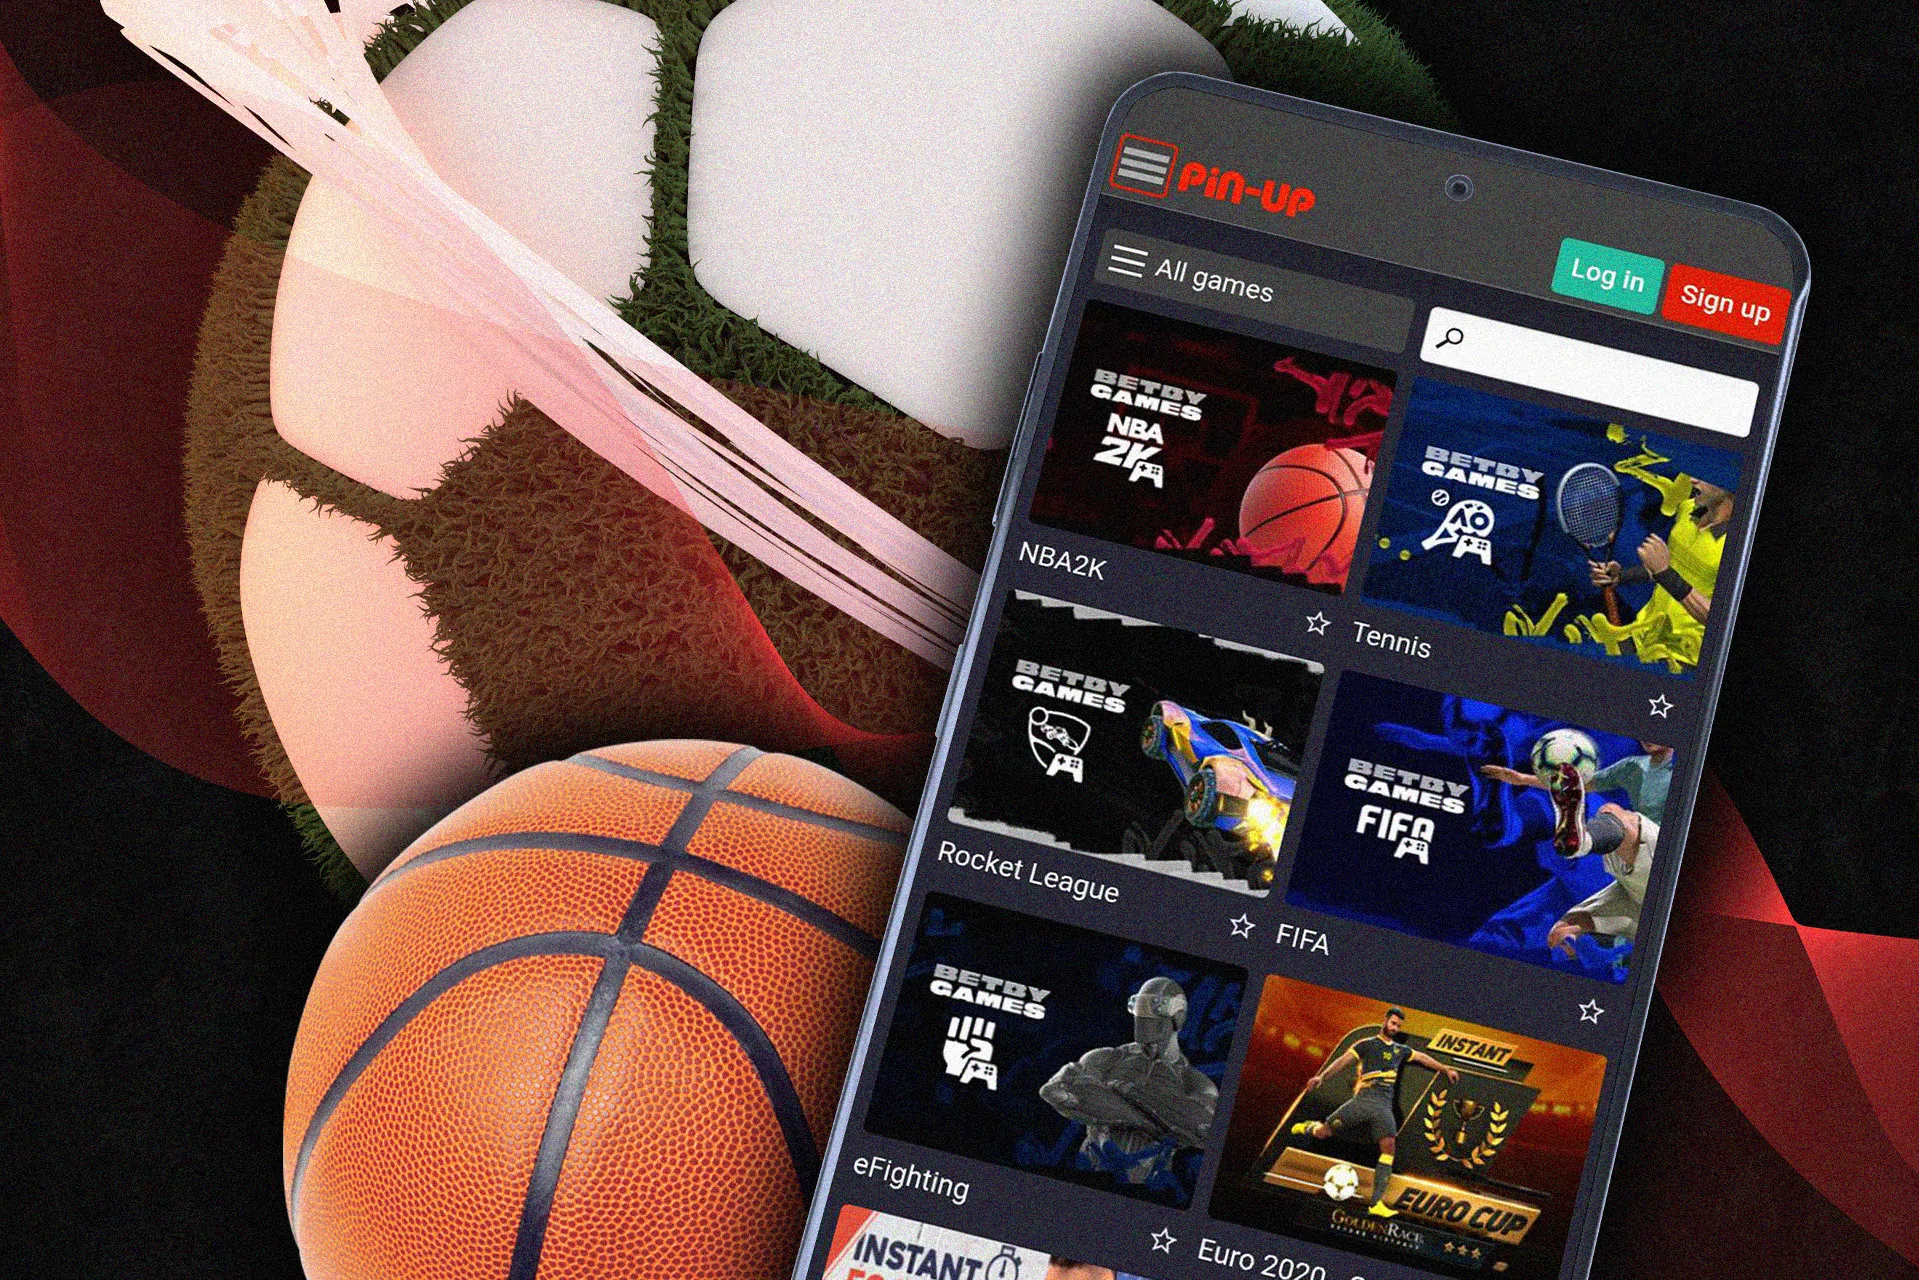 Bet on vrtual sports in the Pin-Up mobile application.